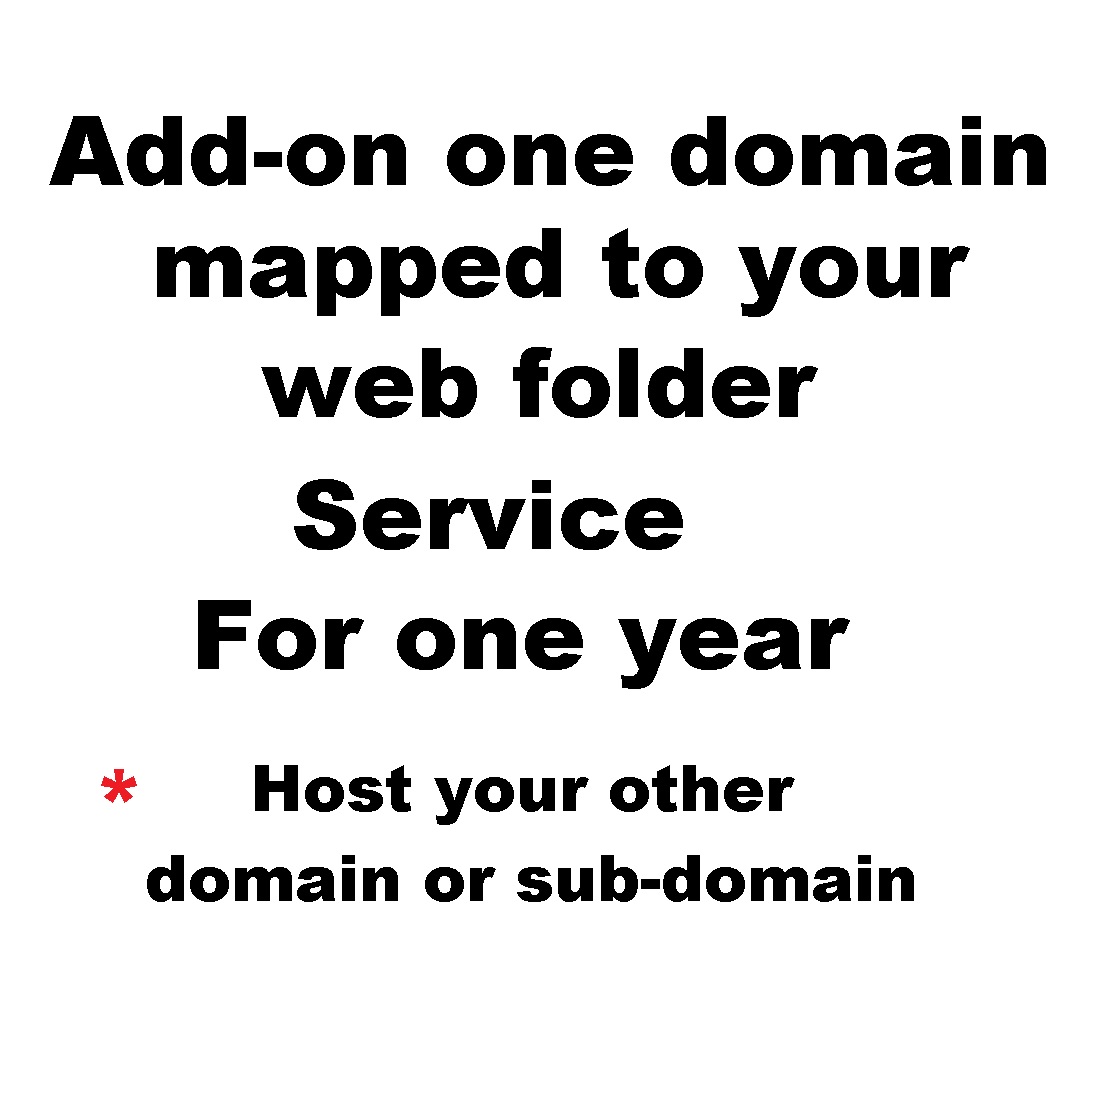 Add on one domain